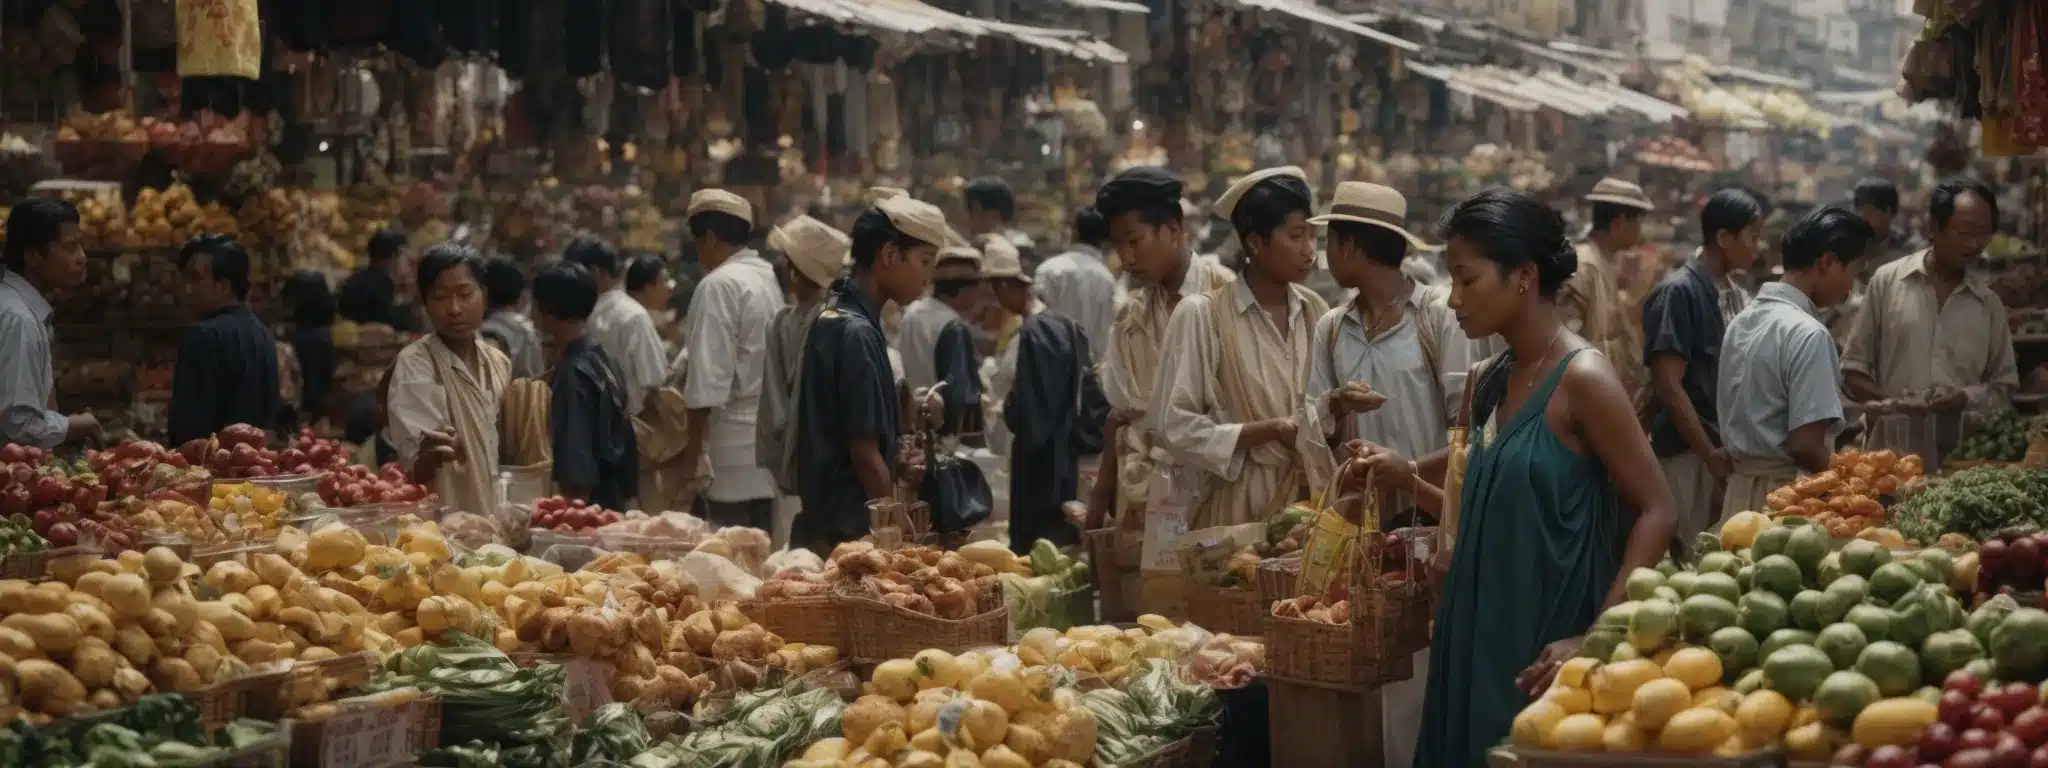 A Bustling Market Scene With Diverse Shoppers Examining Various Products With Visible Price Tags.